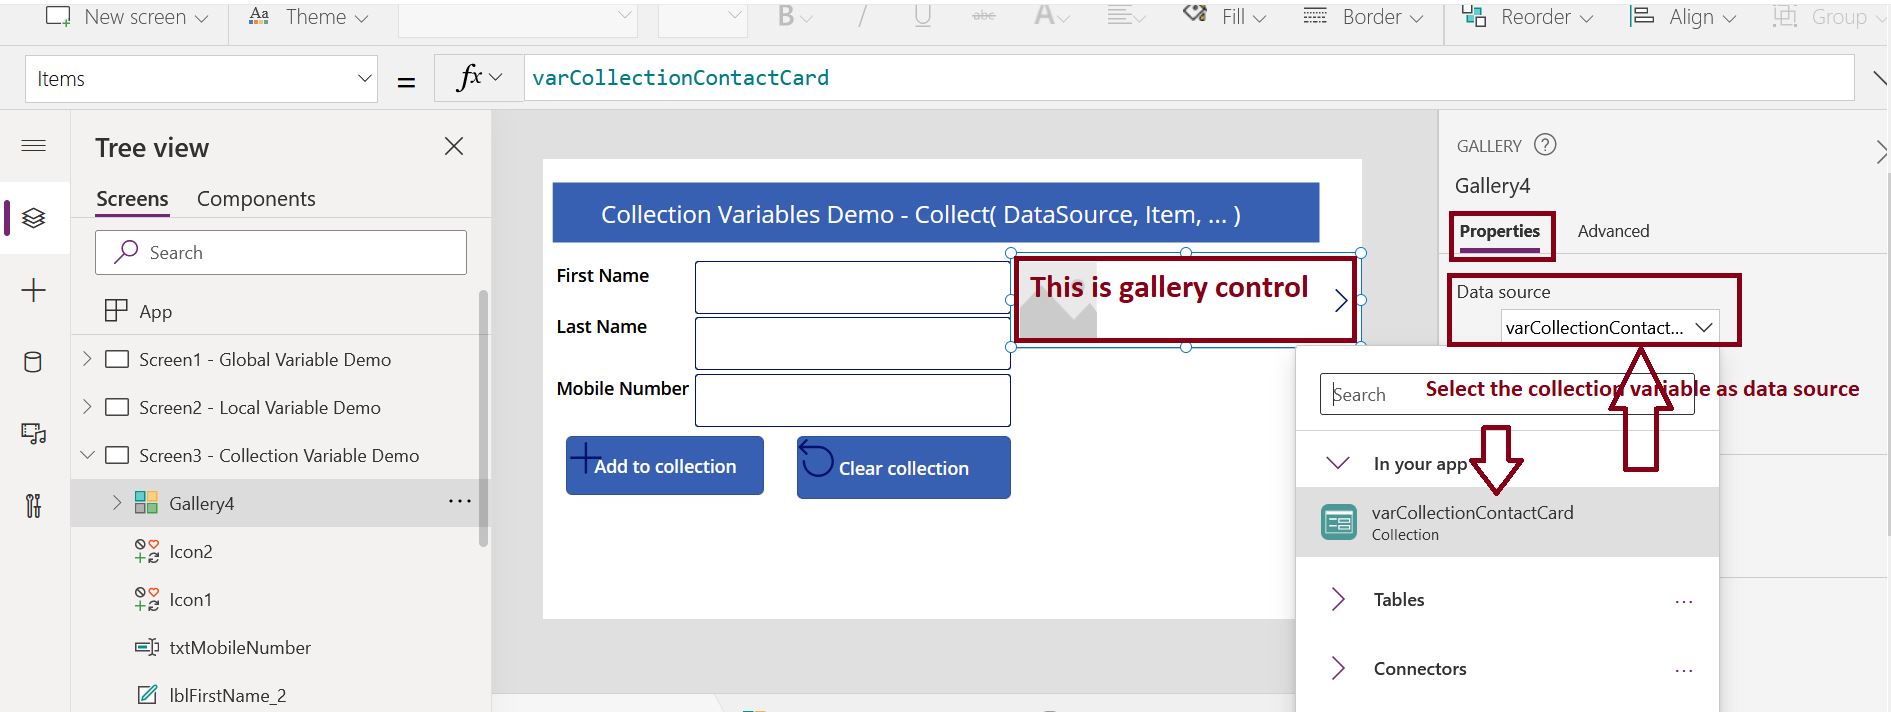 Configure data source in PowerApps gallery control